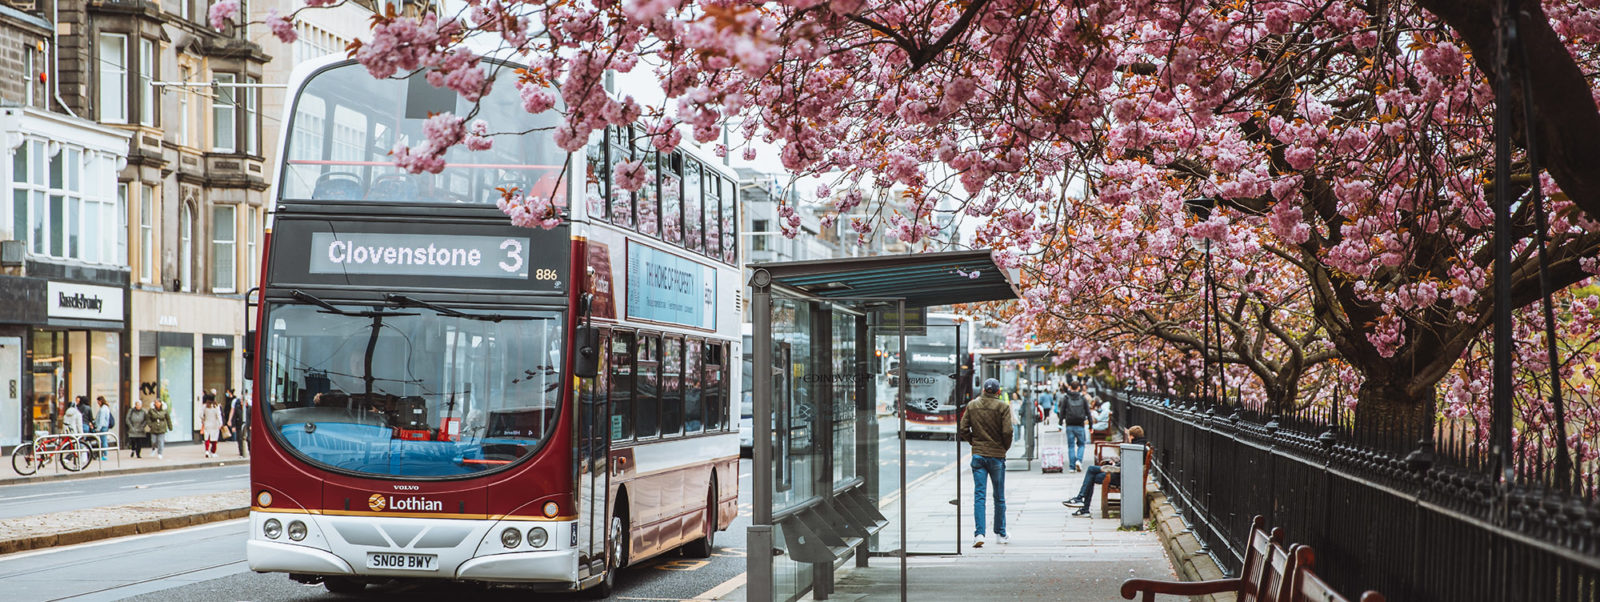 Image of a Lothian City bus with cherry blossom trees